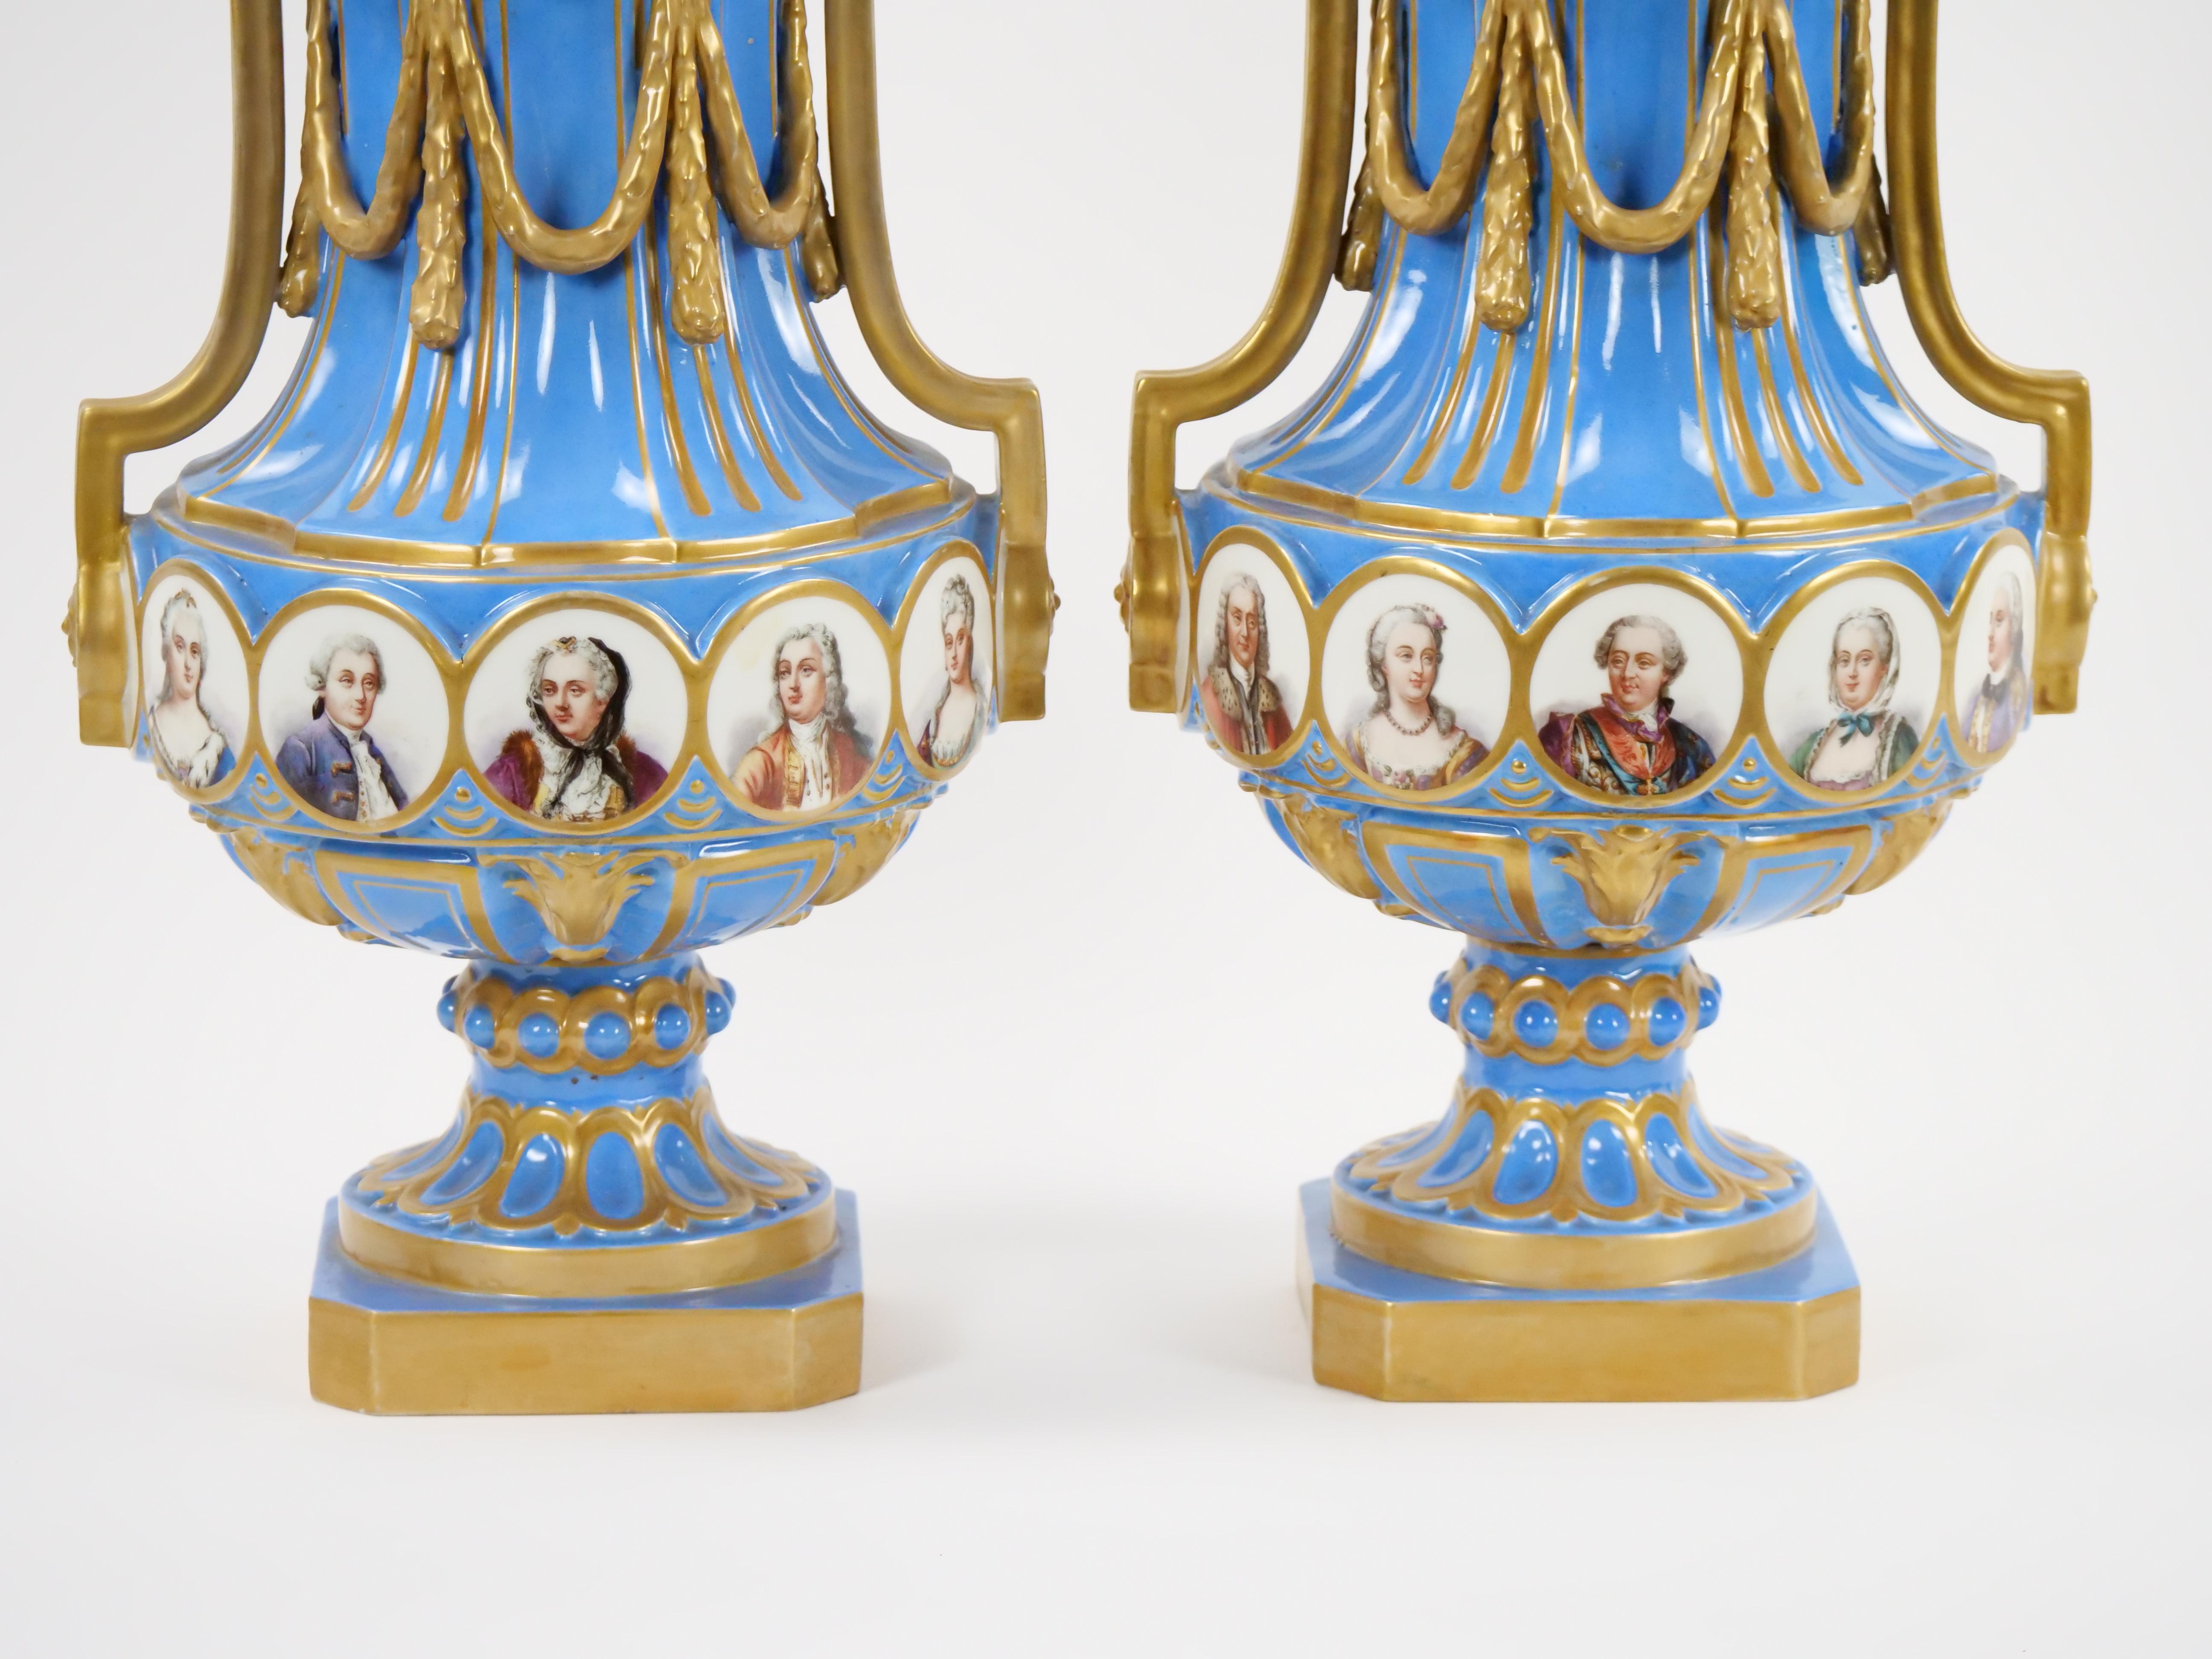 Indulge in the charm of 19th Century French artistry with this exquisite Louis XV Sevres style blue celeste vase, complete with its matching covers. Drawing inspiration from the elegance of the Louis XV era, this vase/ covered urn embodies the grace